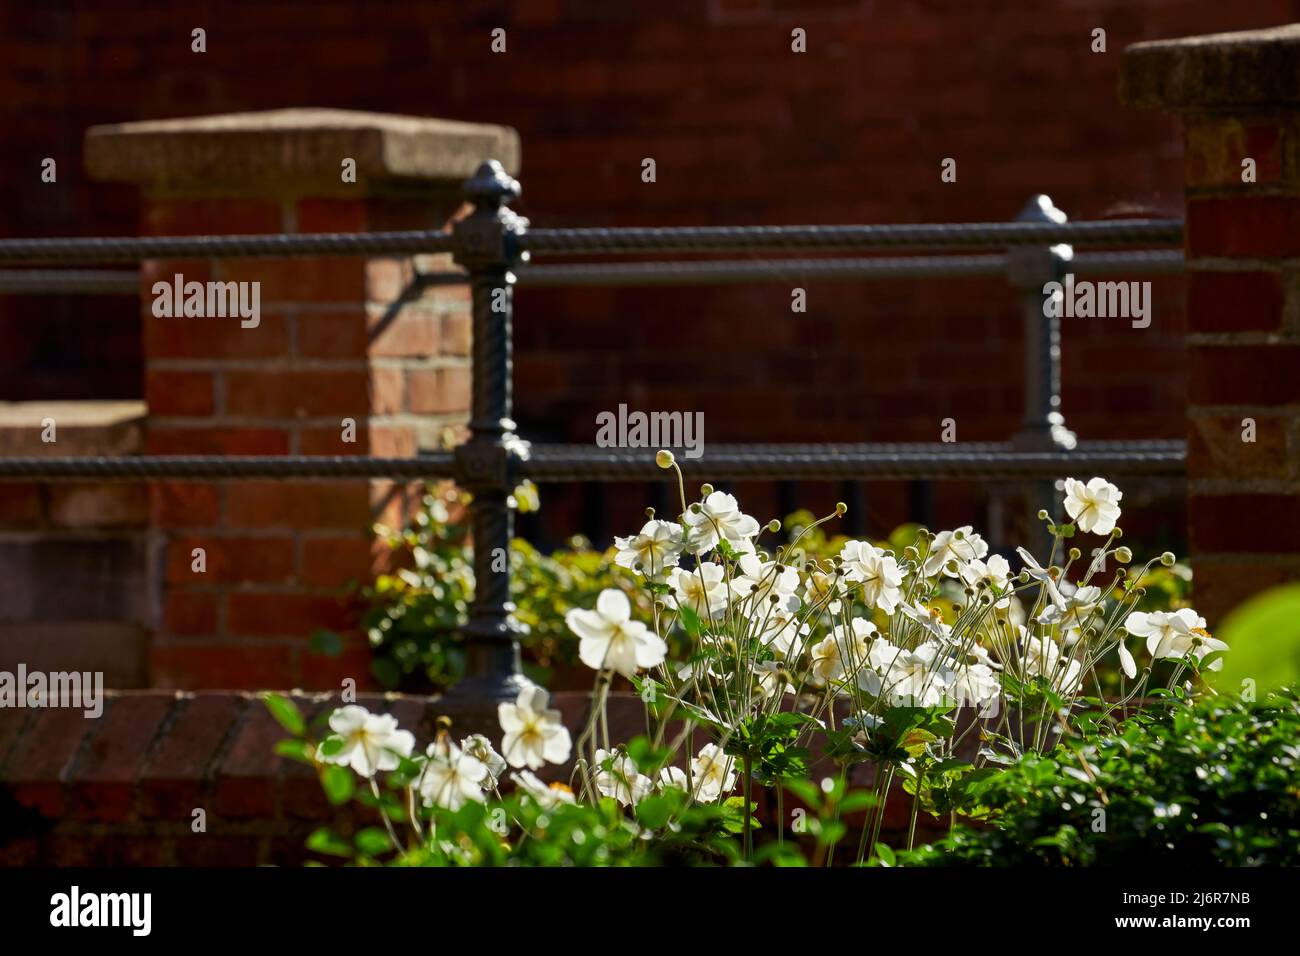 Garden with flowers and steel railing in North London, Hampstead, London, UK Stock Photo